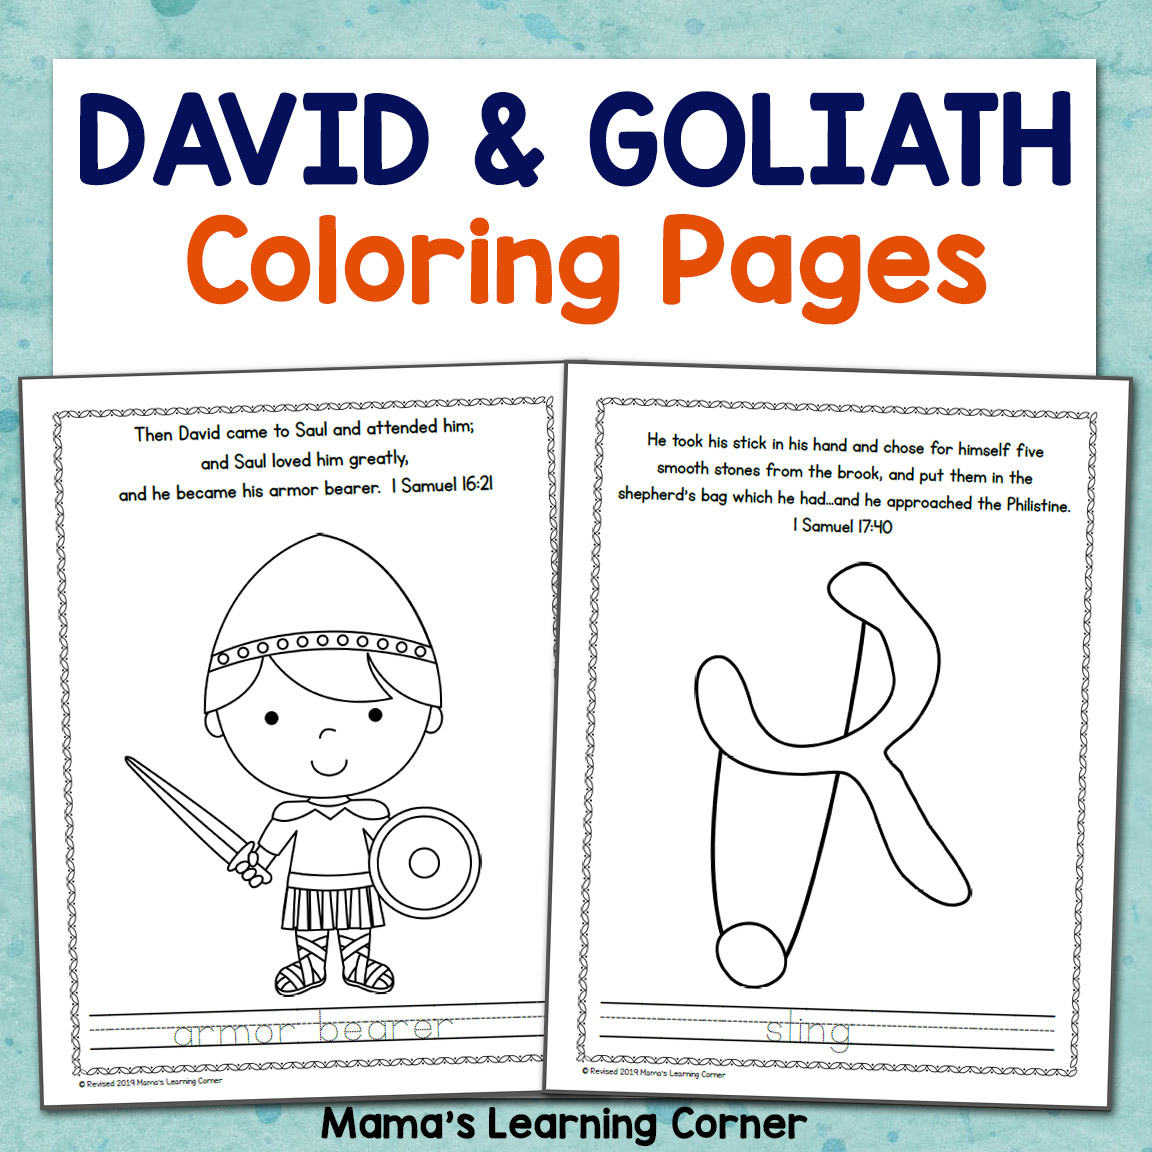 David and Goliath Coloring Pages Mamas Learning Corner